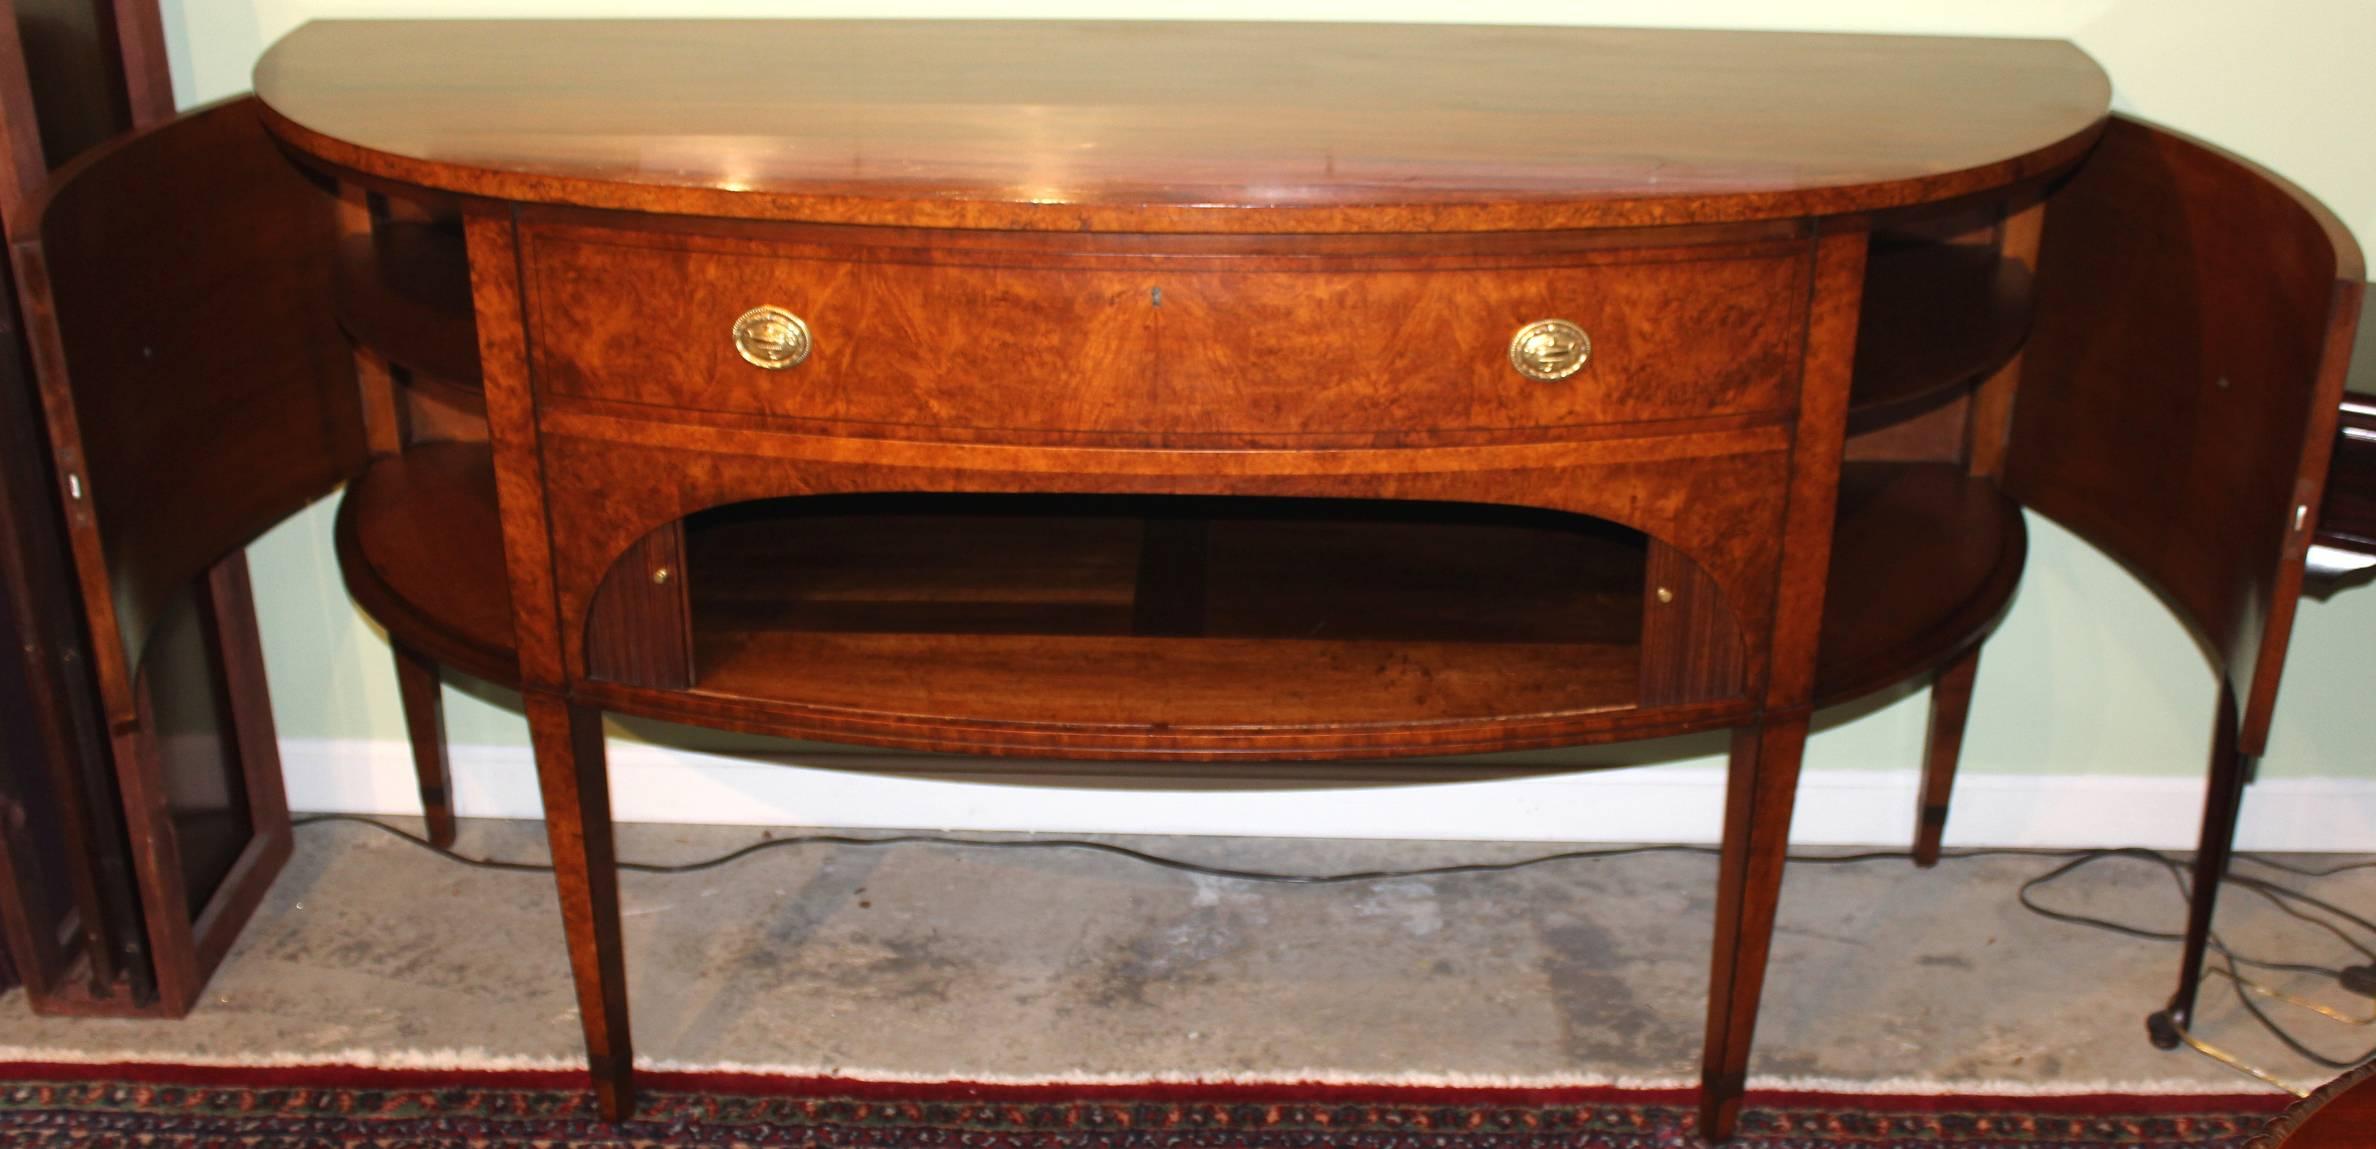 Demilune Mahogany Sideboard or Server with Burled Walnut and Tambour Doors 1